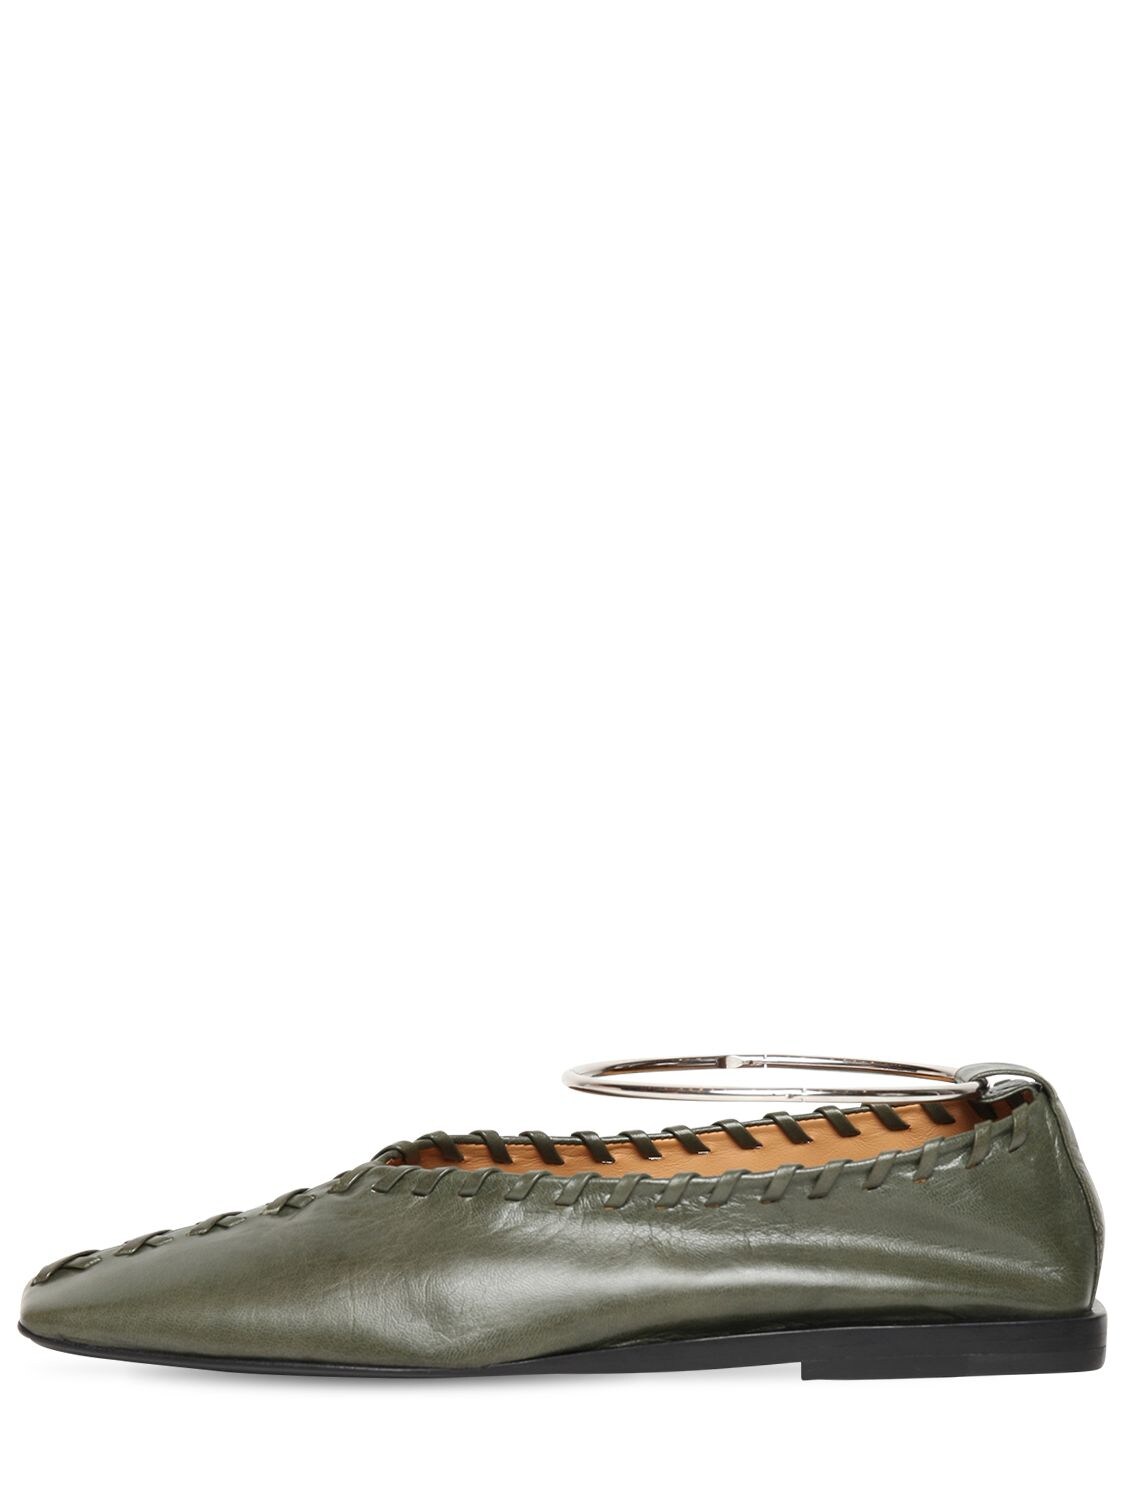 Jil Sander 10mm Stitched Leather Flats In Green